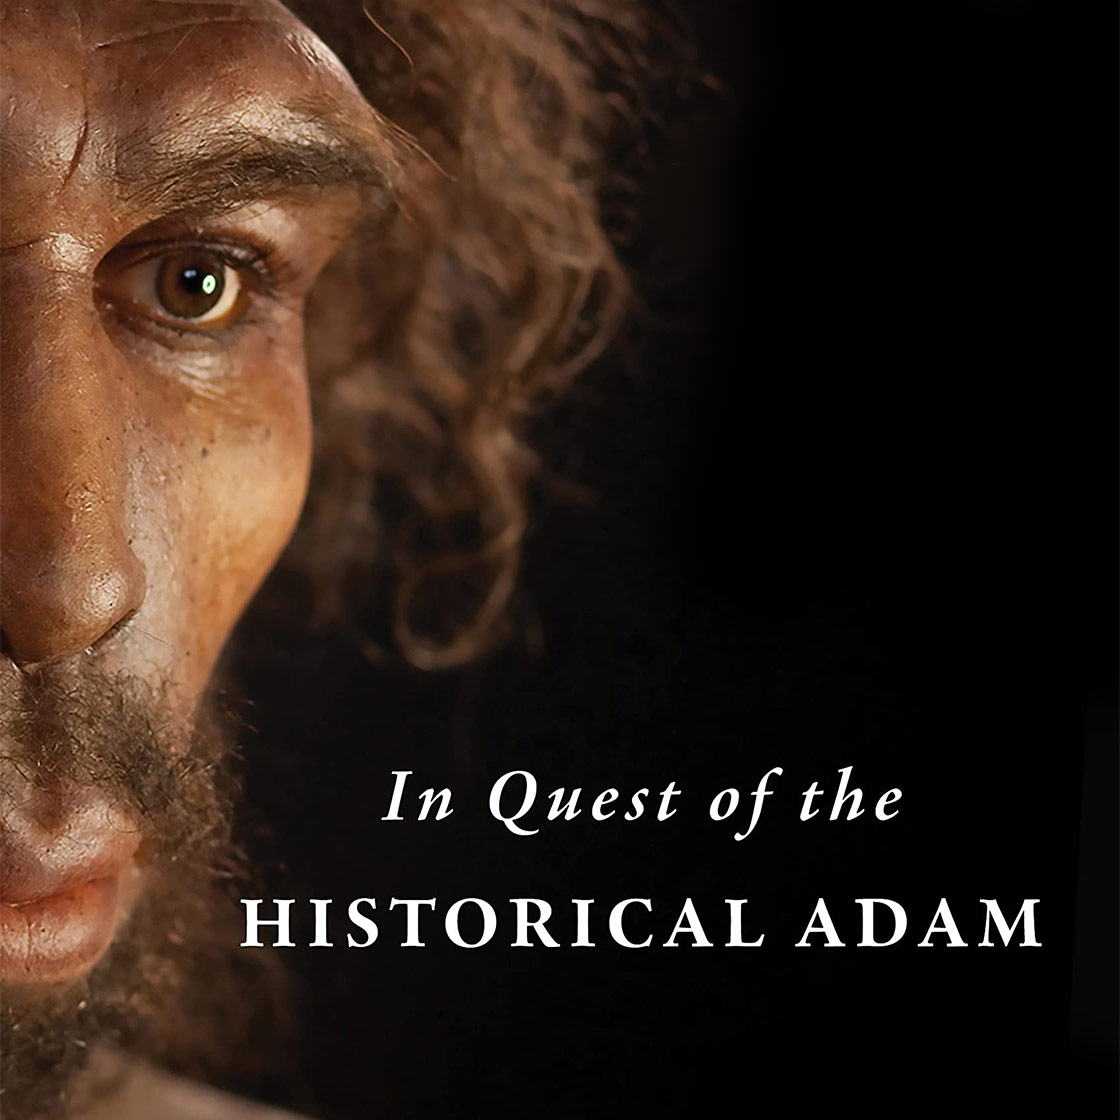 In Quest of the Historical Adam (detail of book cover)